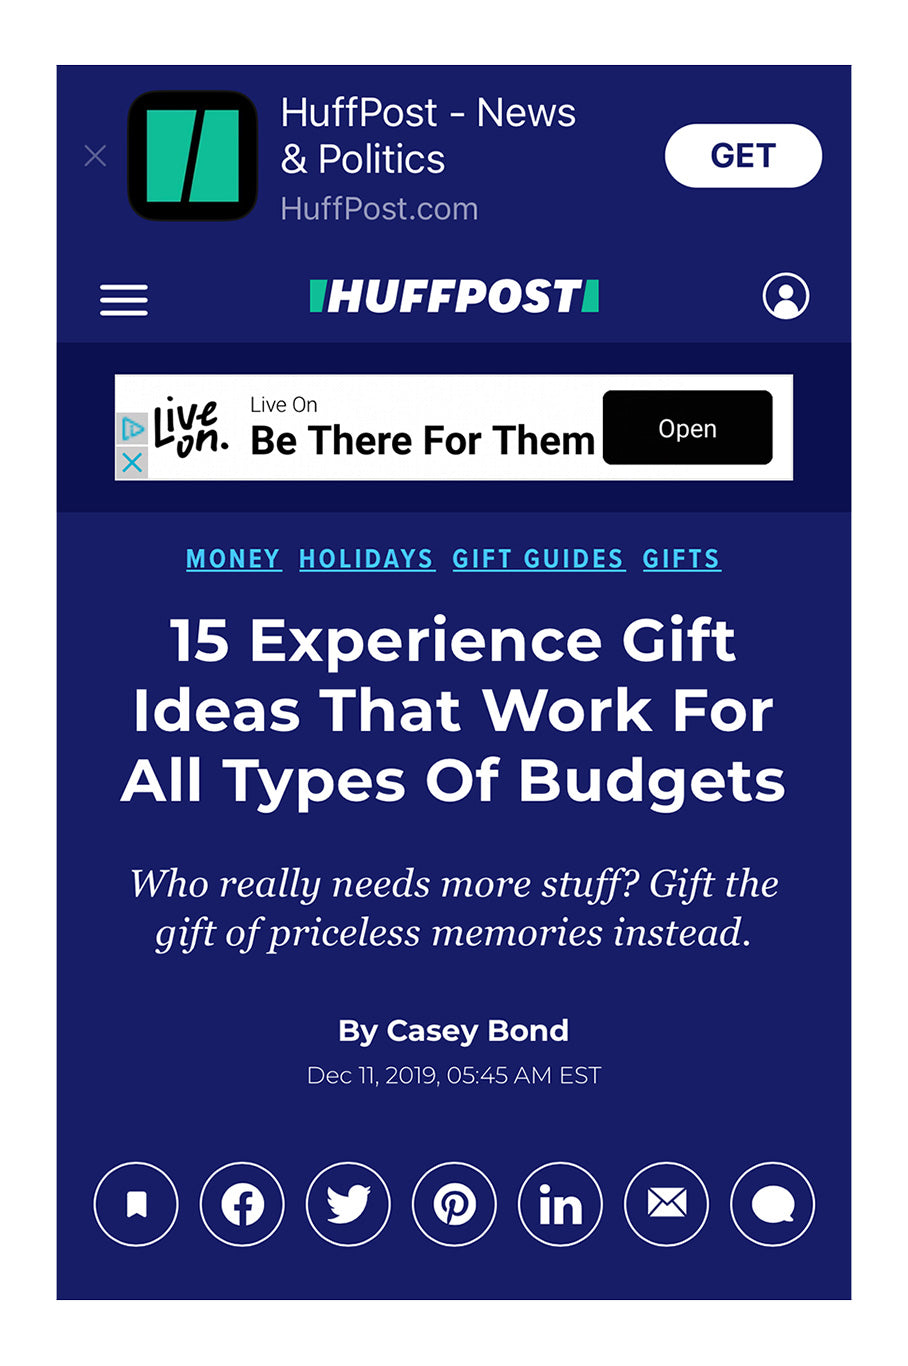 15 Experience Gift Ideas that work for all types of budgets, December 2019